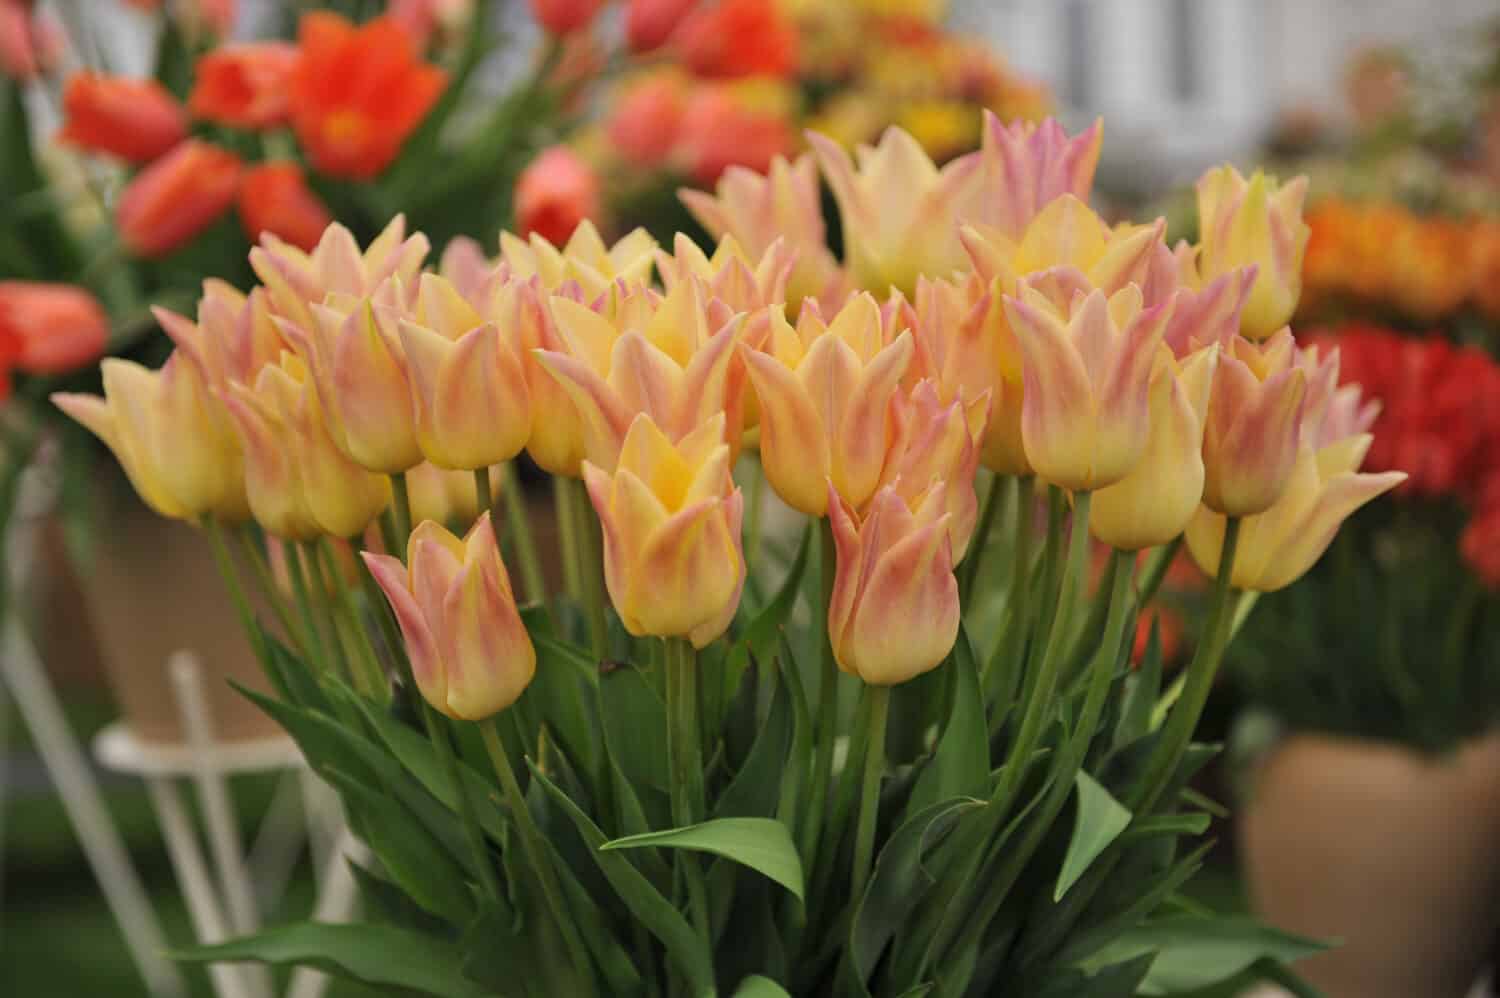 A bouquet of pinky-yellow lily-flowered tulips (Tulipa) Elegant Lady on an exhibition in May